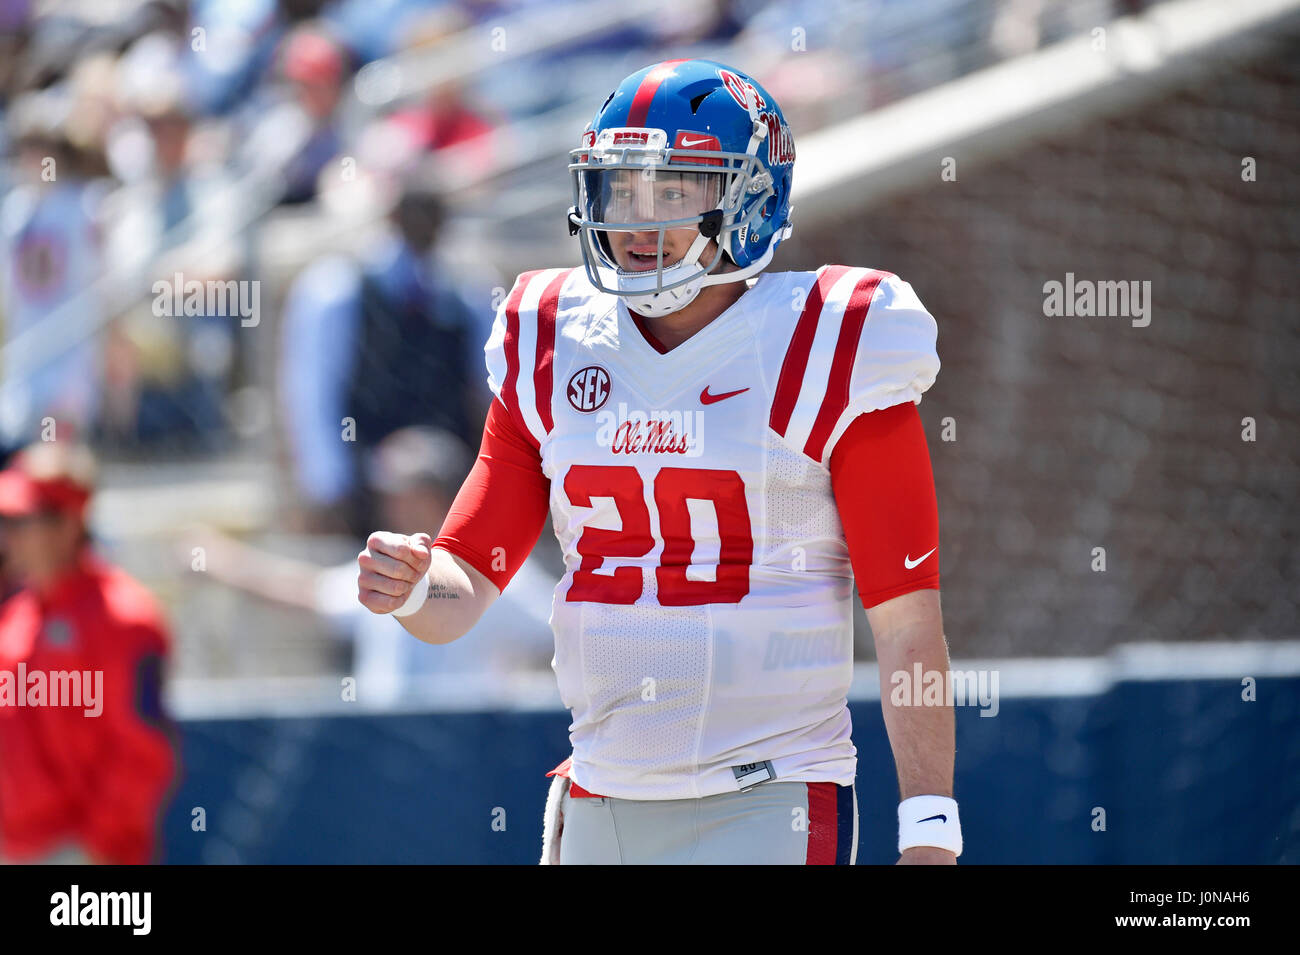 Oxford, MS, USA. 8th Apr, 2017. Red quarterback Shea Patterson during the second quarter of an NCAA college football spring game at Vaught-Hemmingway Stadium in Oxford, MS. The Red team won 31-29. Austin McAfee/CSM/Alamy Live News Stock Photo